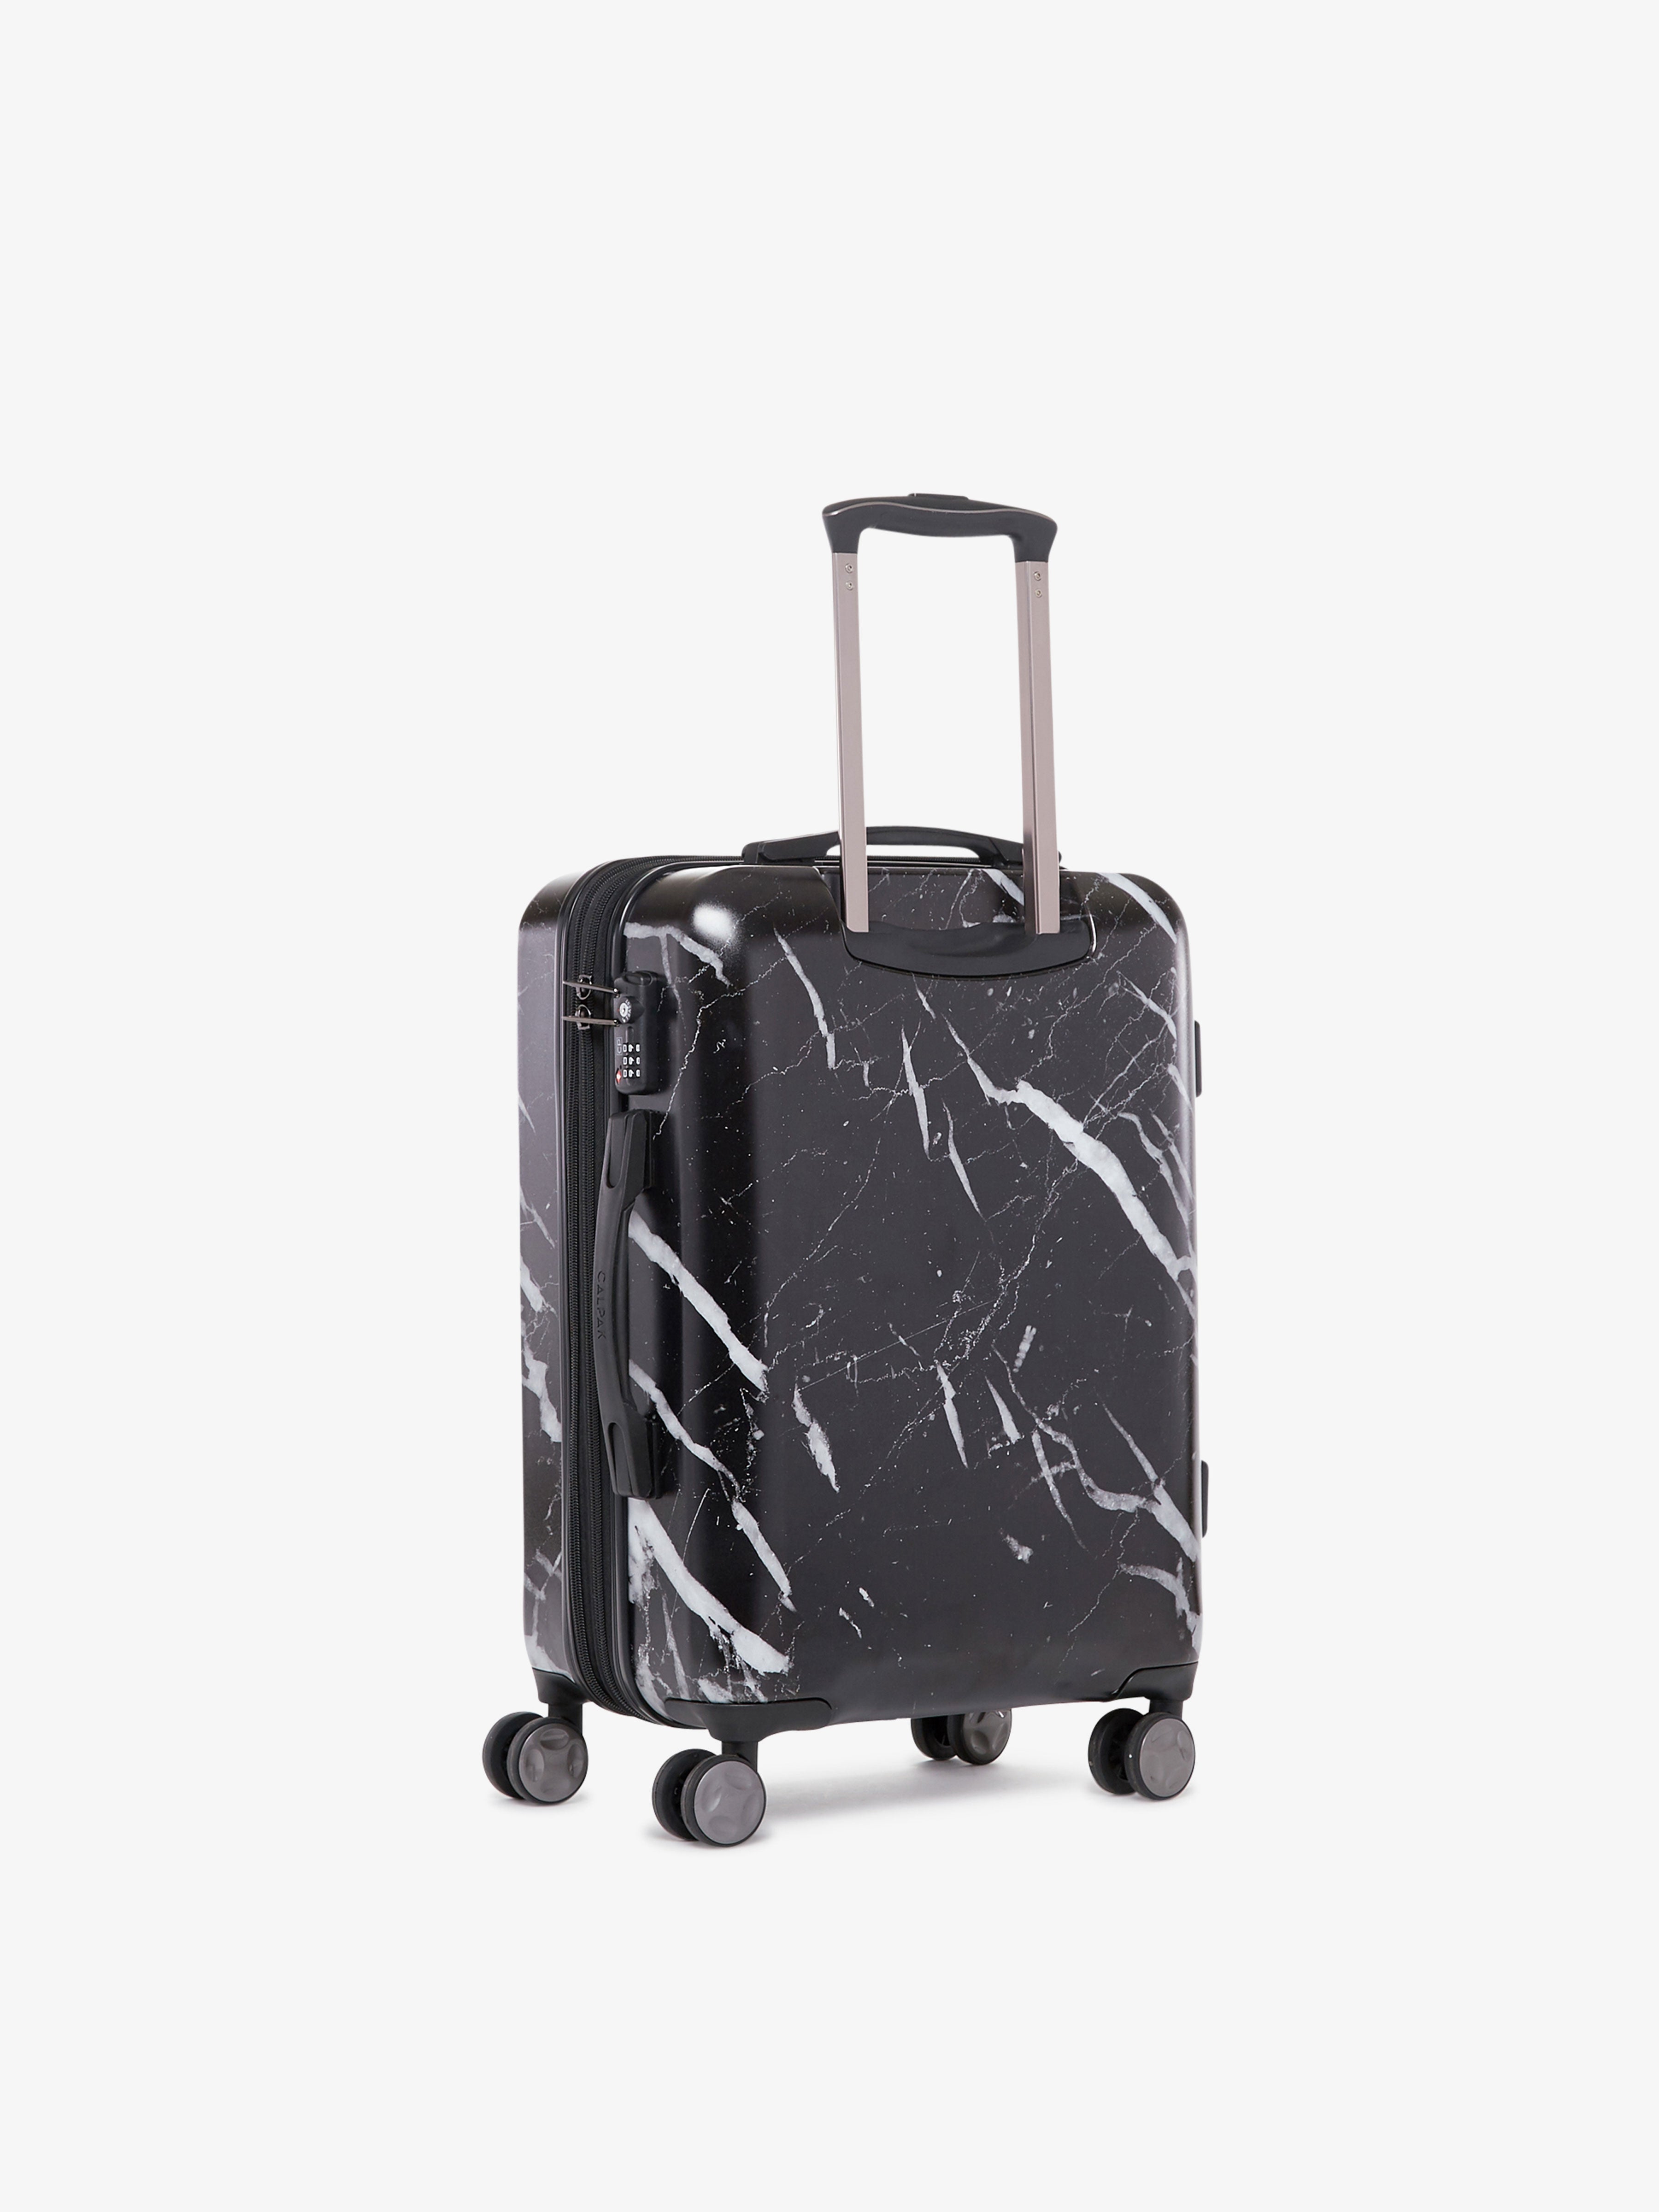 Astyll 3-Piece luggage set with 360 spinner wheels in midnight marble